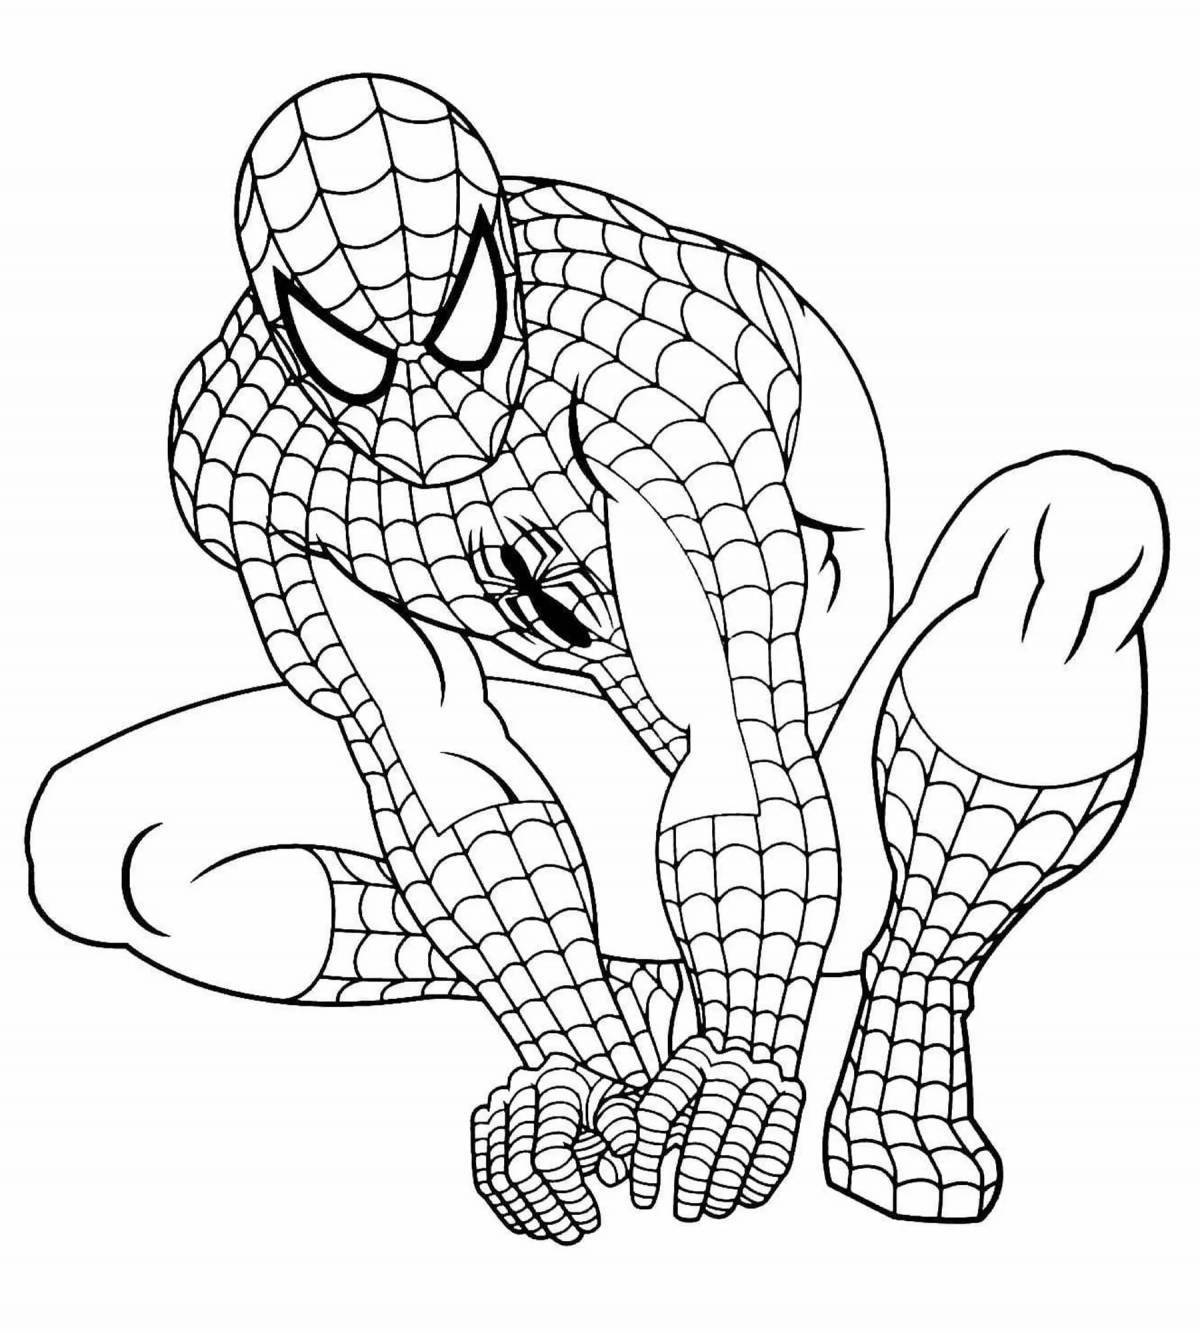 Awesome Spiderman Coloring Pages for Kids